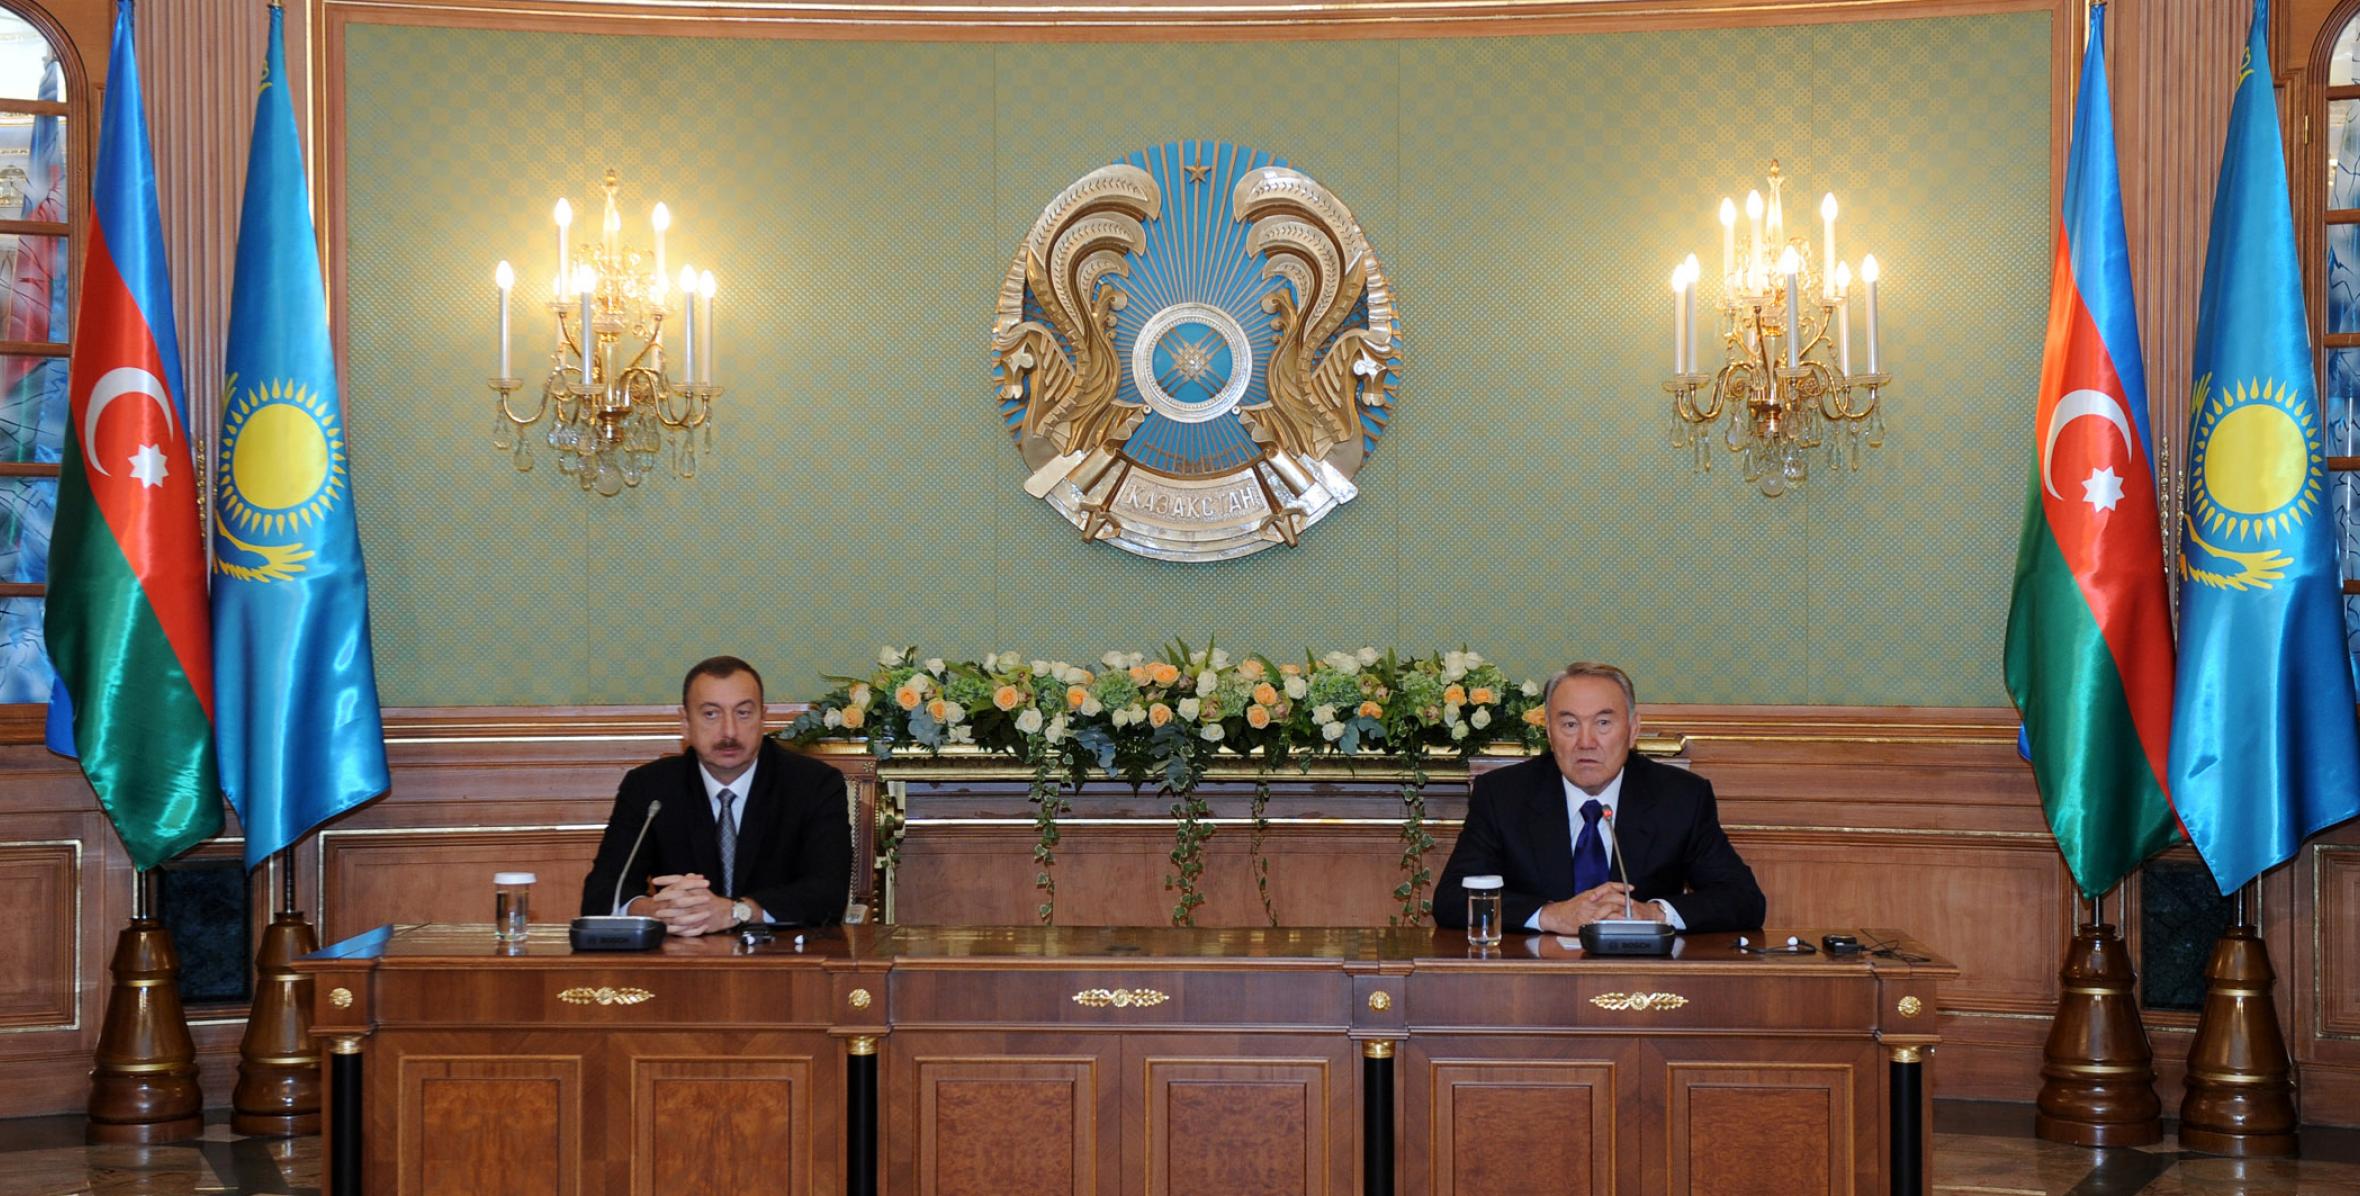 Presidents of Azerbaijan and Kazakhstan made statements for the press